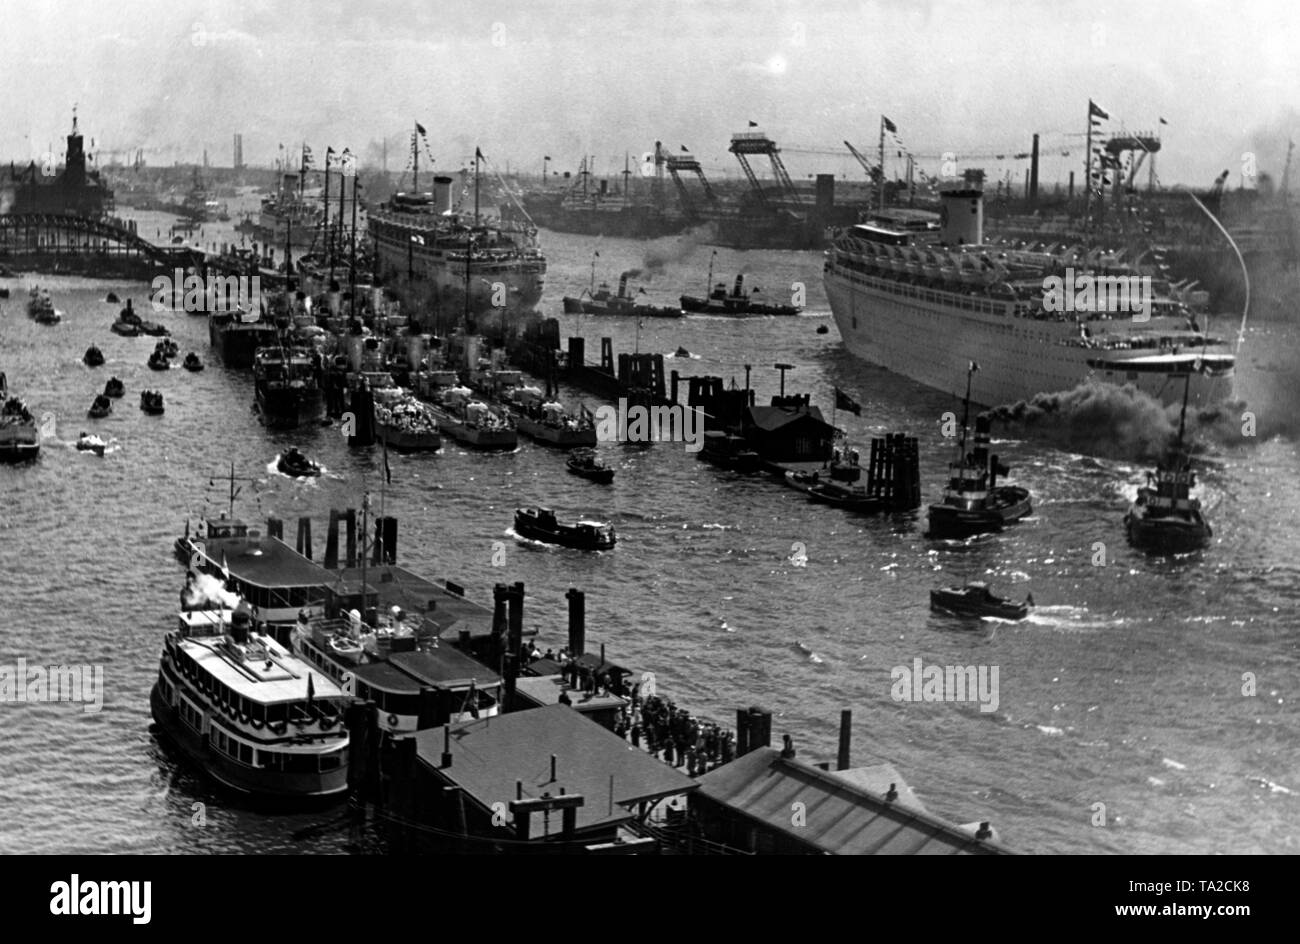 The soldiers of the Condor Legion return to Germany from the Spanish Civil War on the ships of the Nazi organization 'Kraft durch Freude' ('strength through Joy'), including the 'Robert Ley' and 'Der Deutsche'. On the left the Ueberseebruecke in the Port of Hamburg. Stock Photo